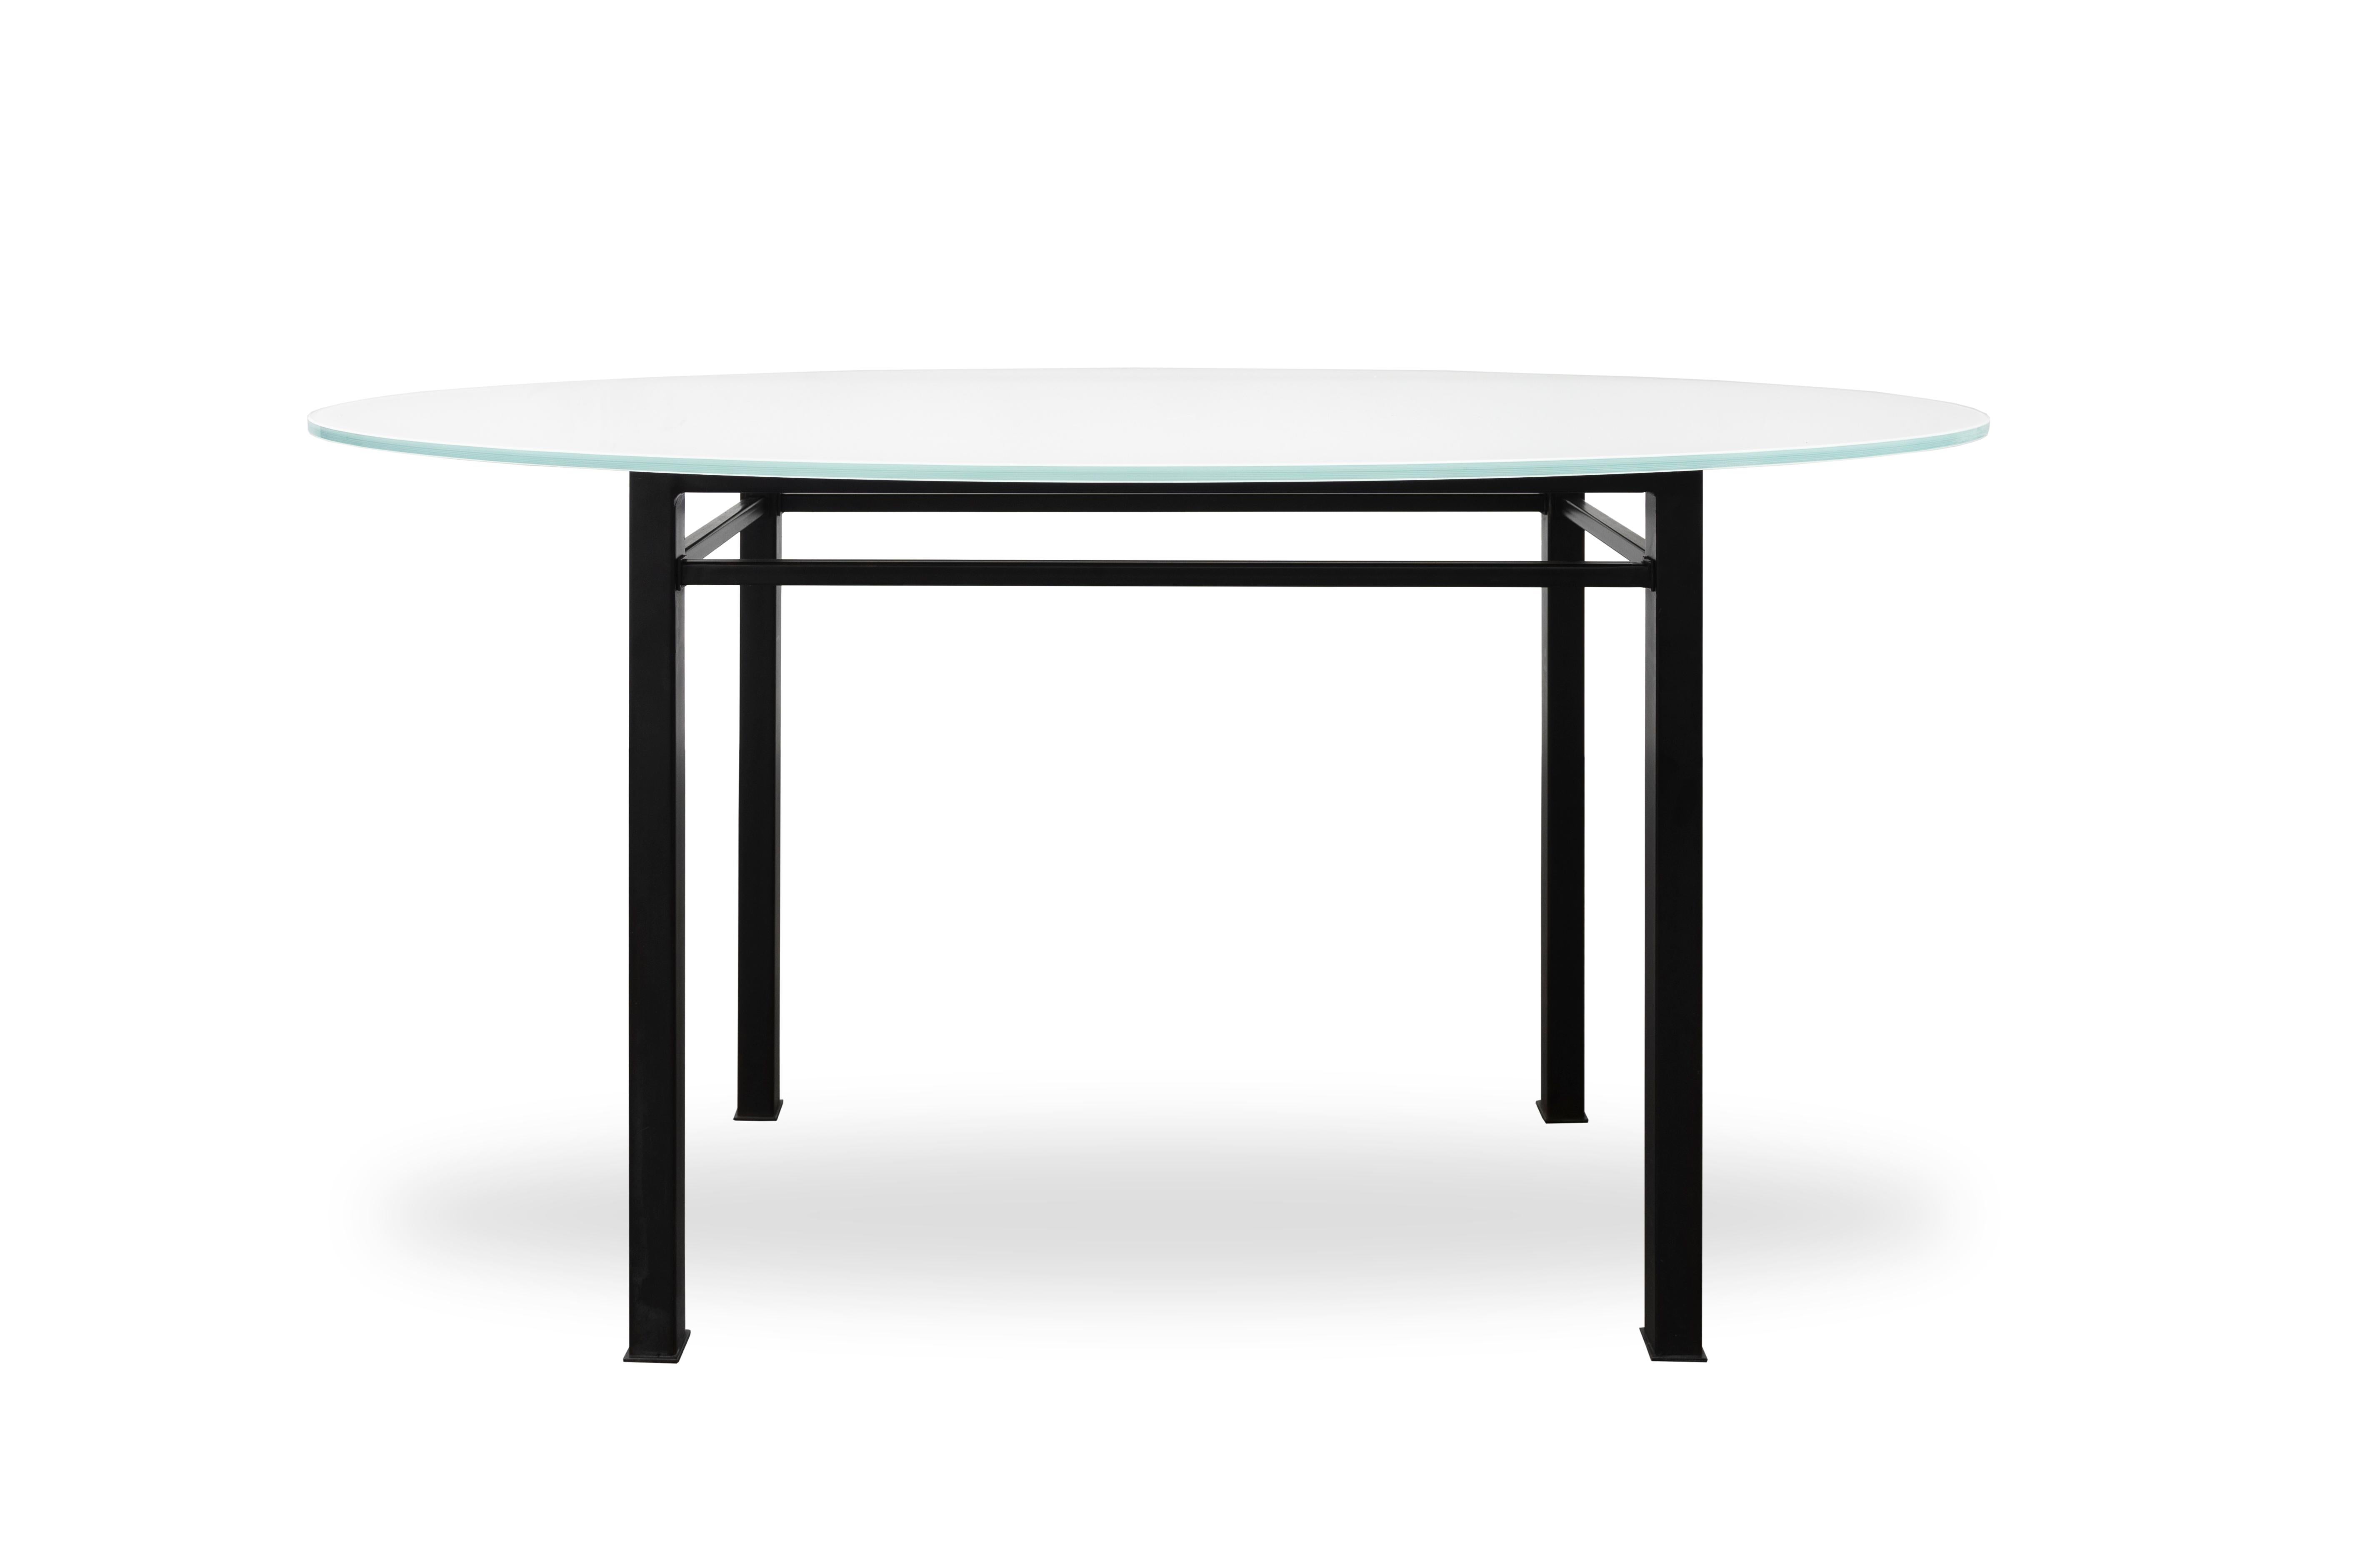 The 90° Glass & Metal Oval Dining Table features a frame made of blackened steel accented by a back-painted glass top in white. 

Handcrafted in the USA.